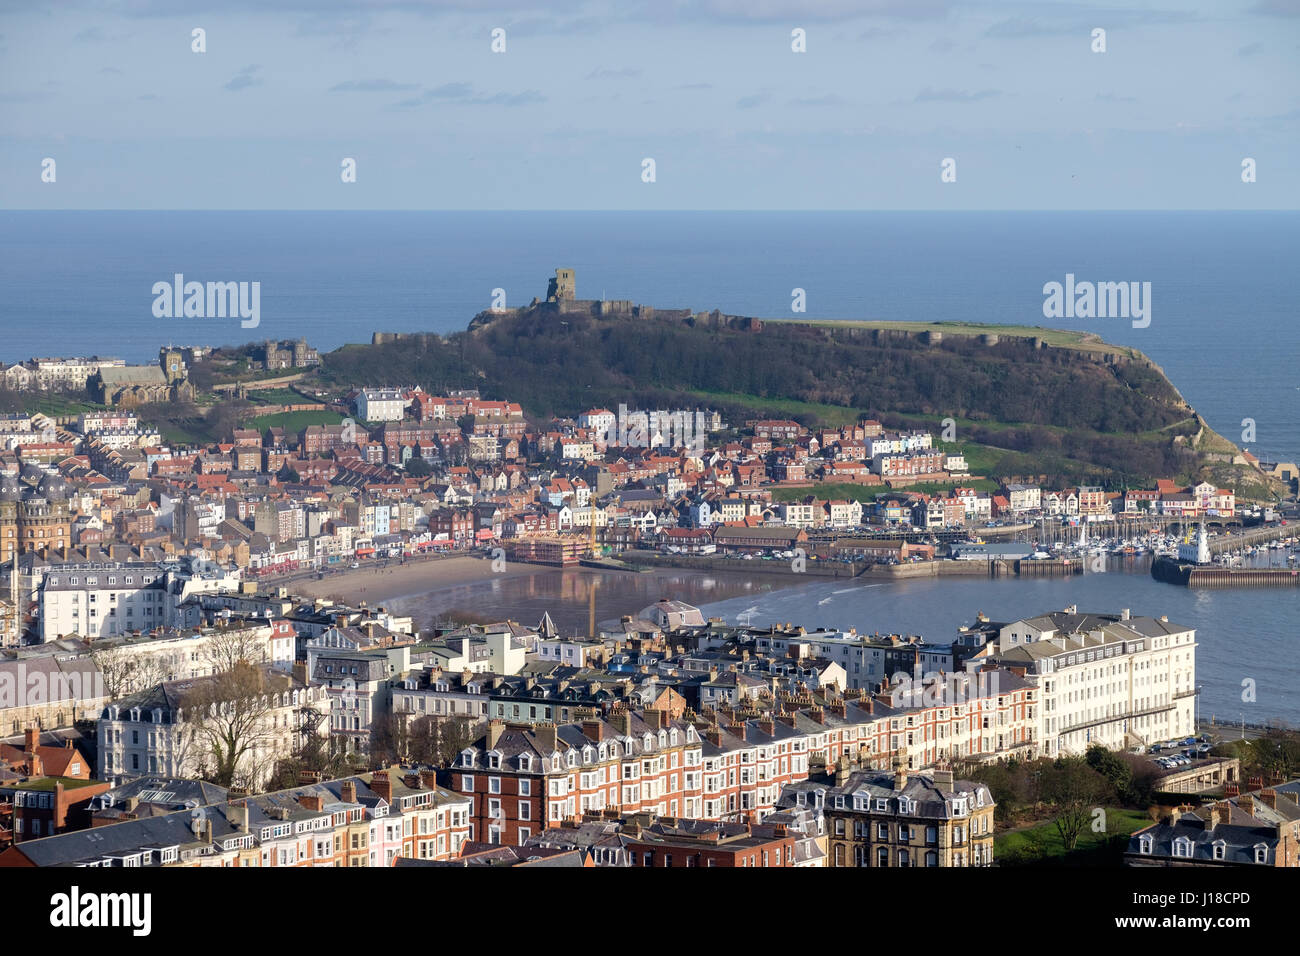 Scarborough is a resort town on England’s North Sea coast. Its 2 bays with sandy beaches are split by a headland bearing the 12th-century Scarborough  Stock Photo